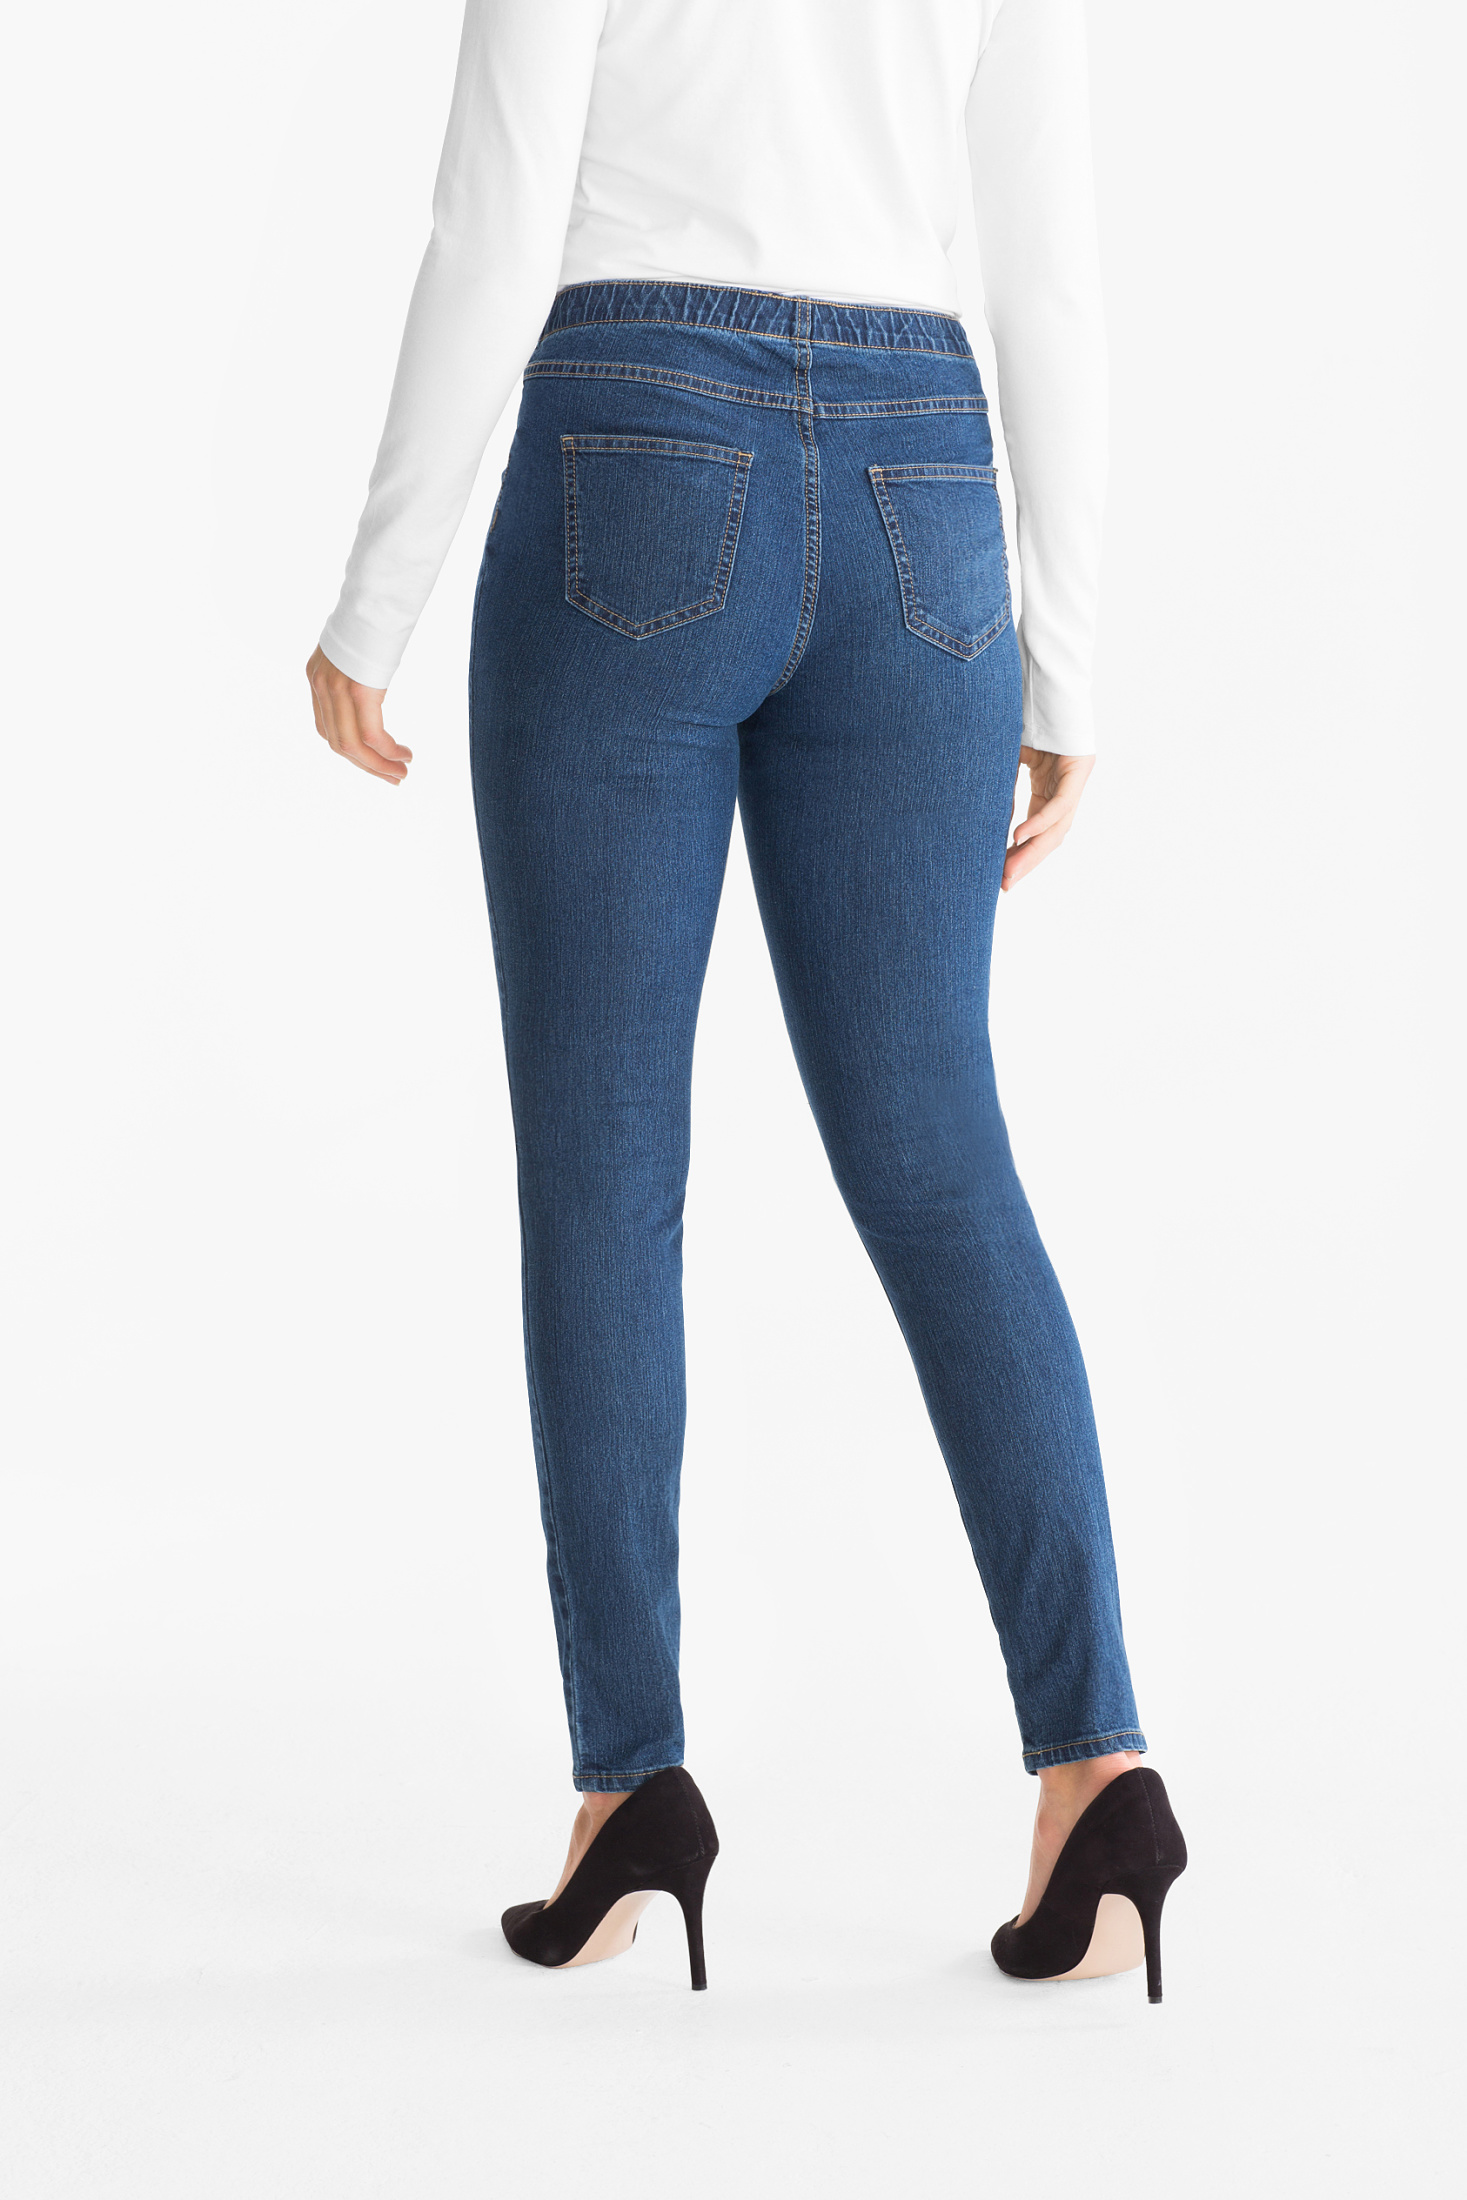 THE JEGGING JEANS | C&A